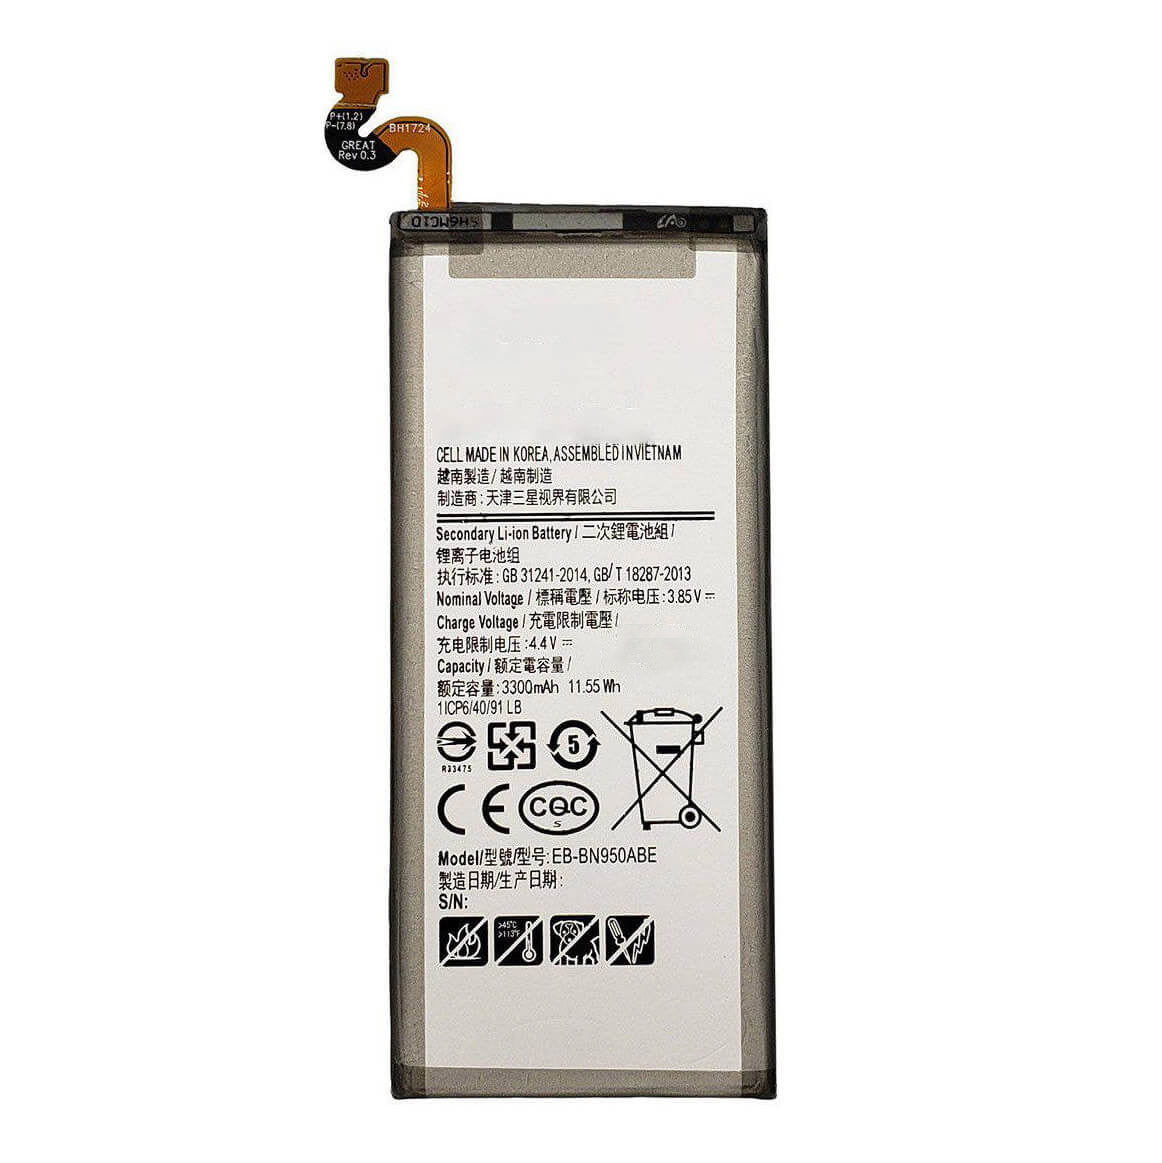 Replacement Battery For Samsung Galaxy Note 8 - EB-BN950ABE